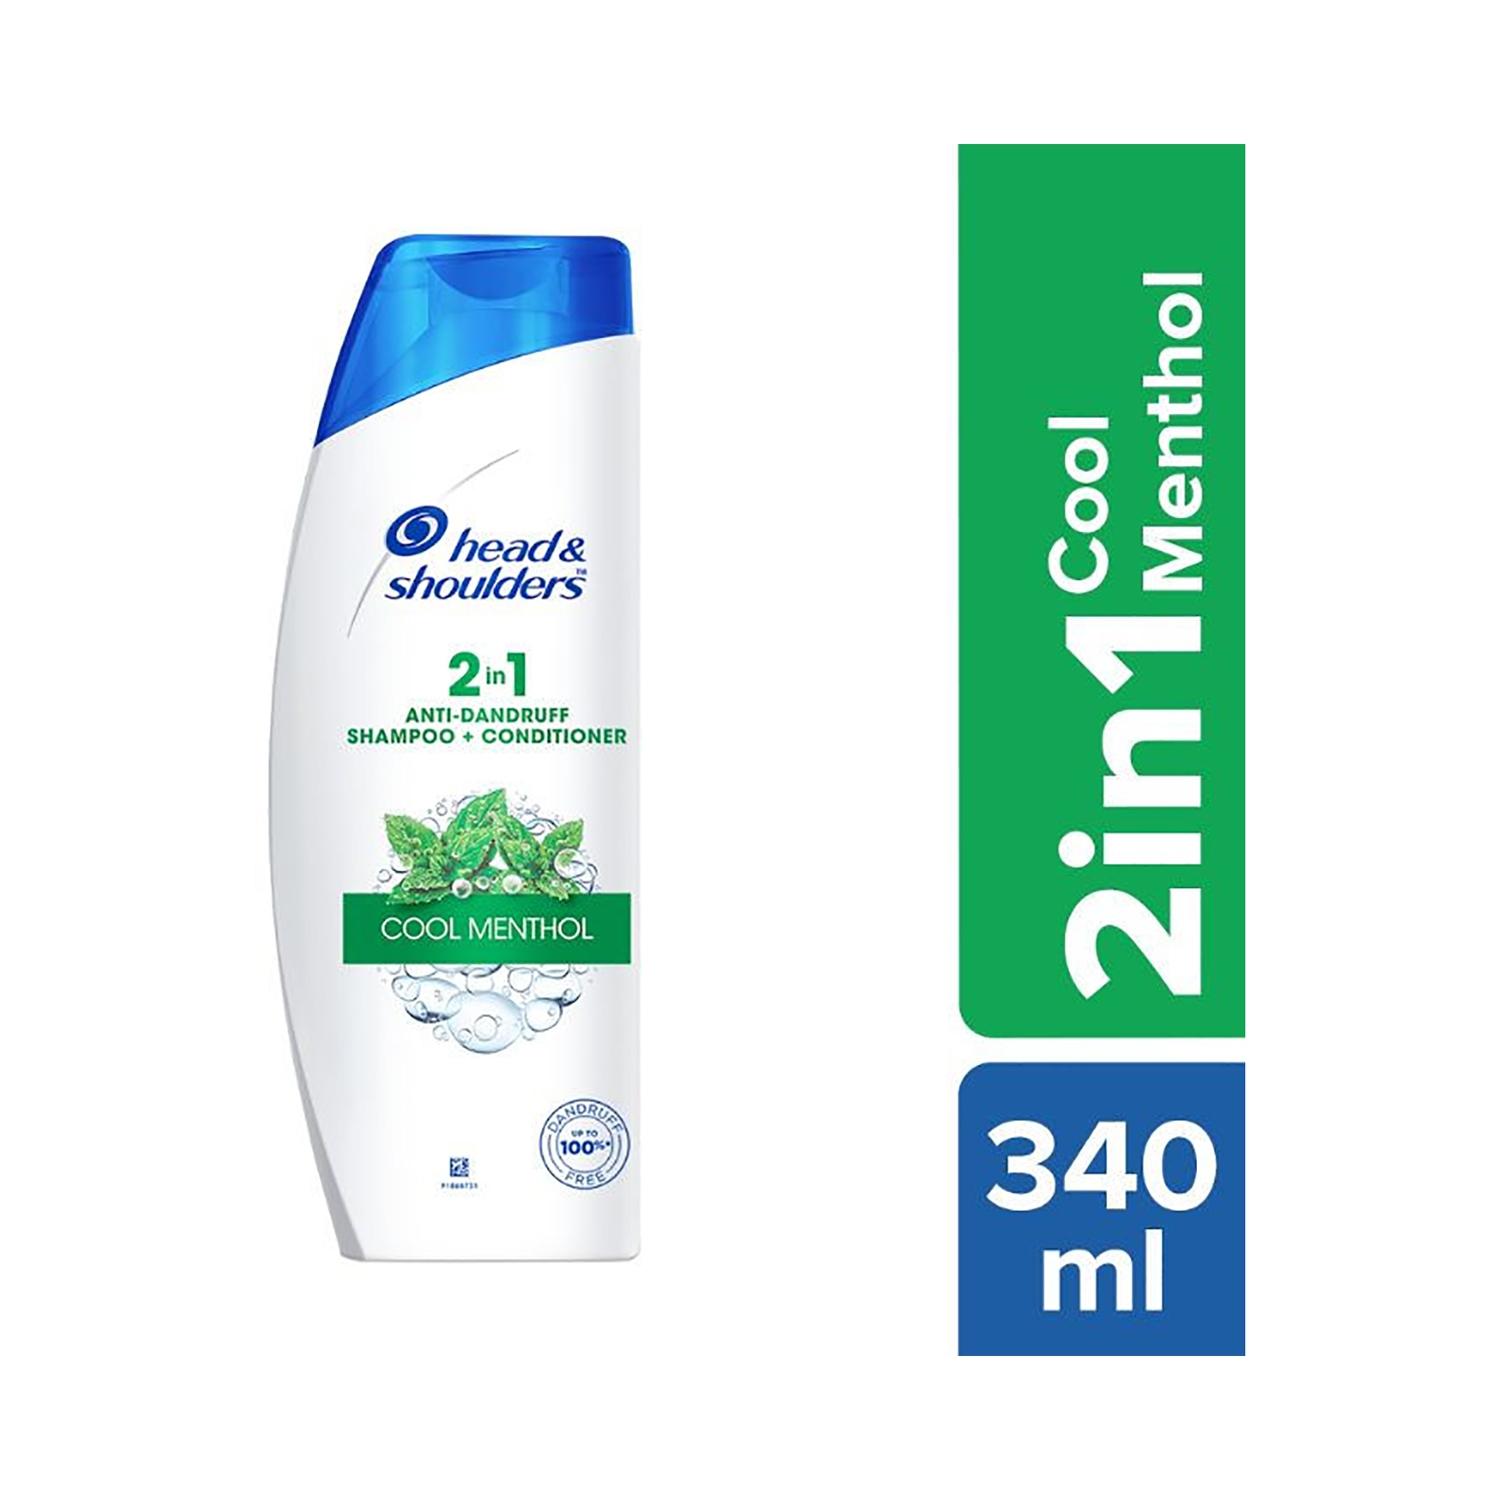 head & shoulders cool menthol 2-in-1 shampoo + conditioner (340ml)